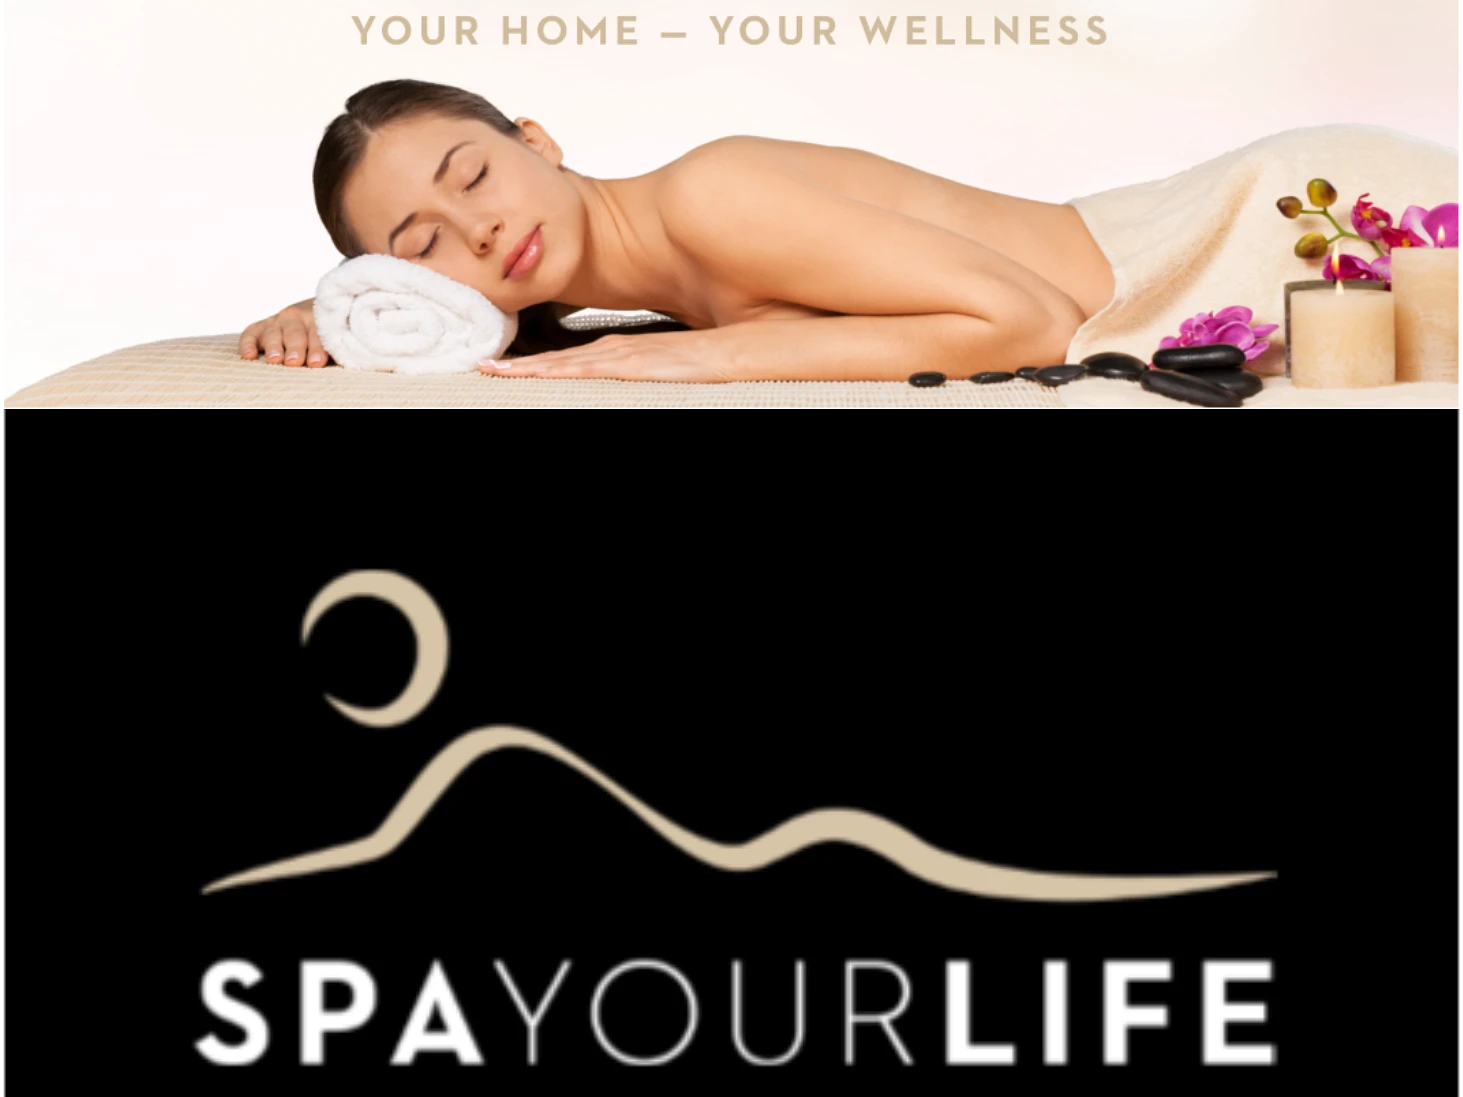 SPA YOUR LIFE